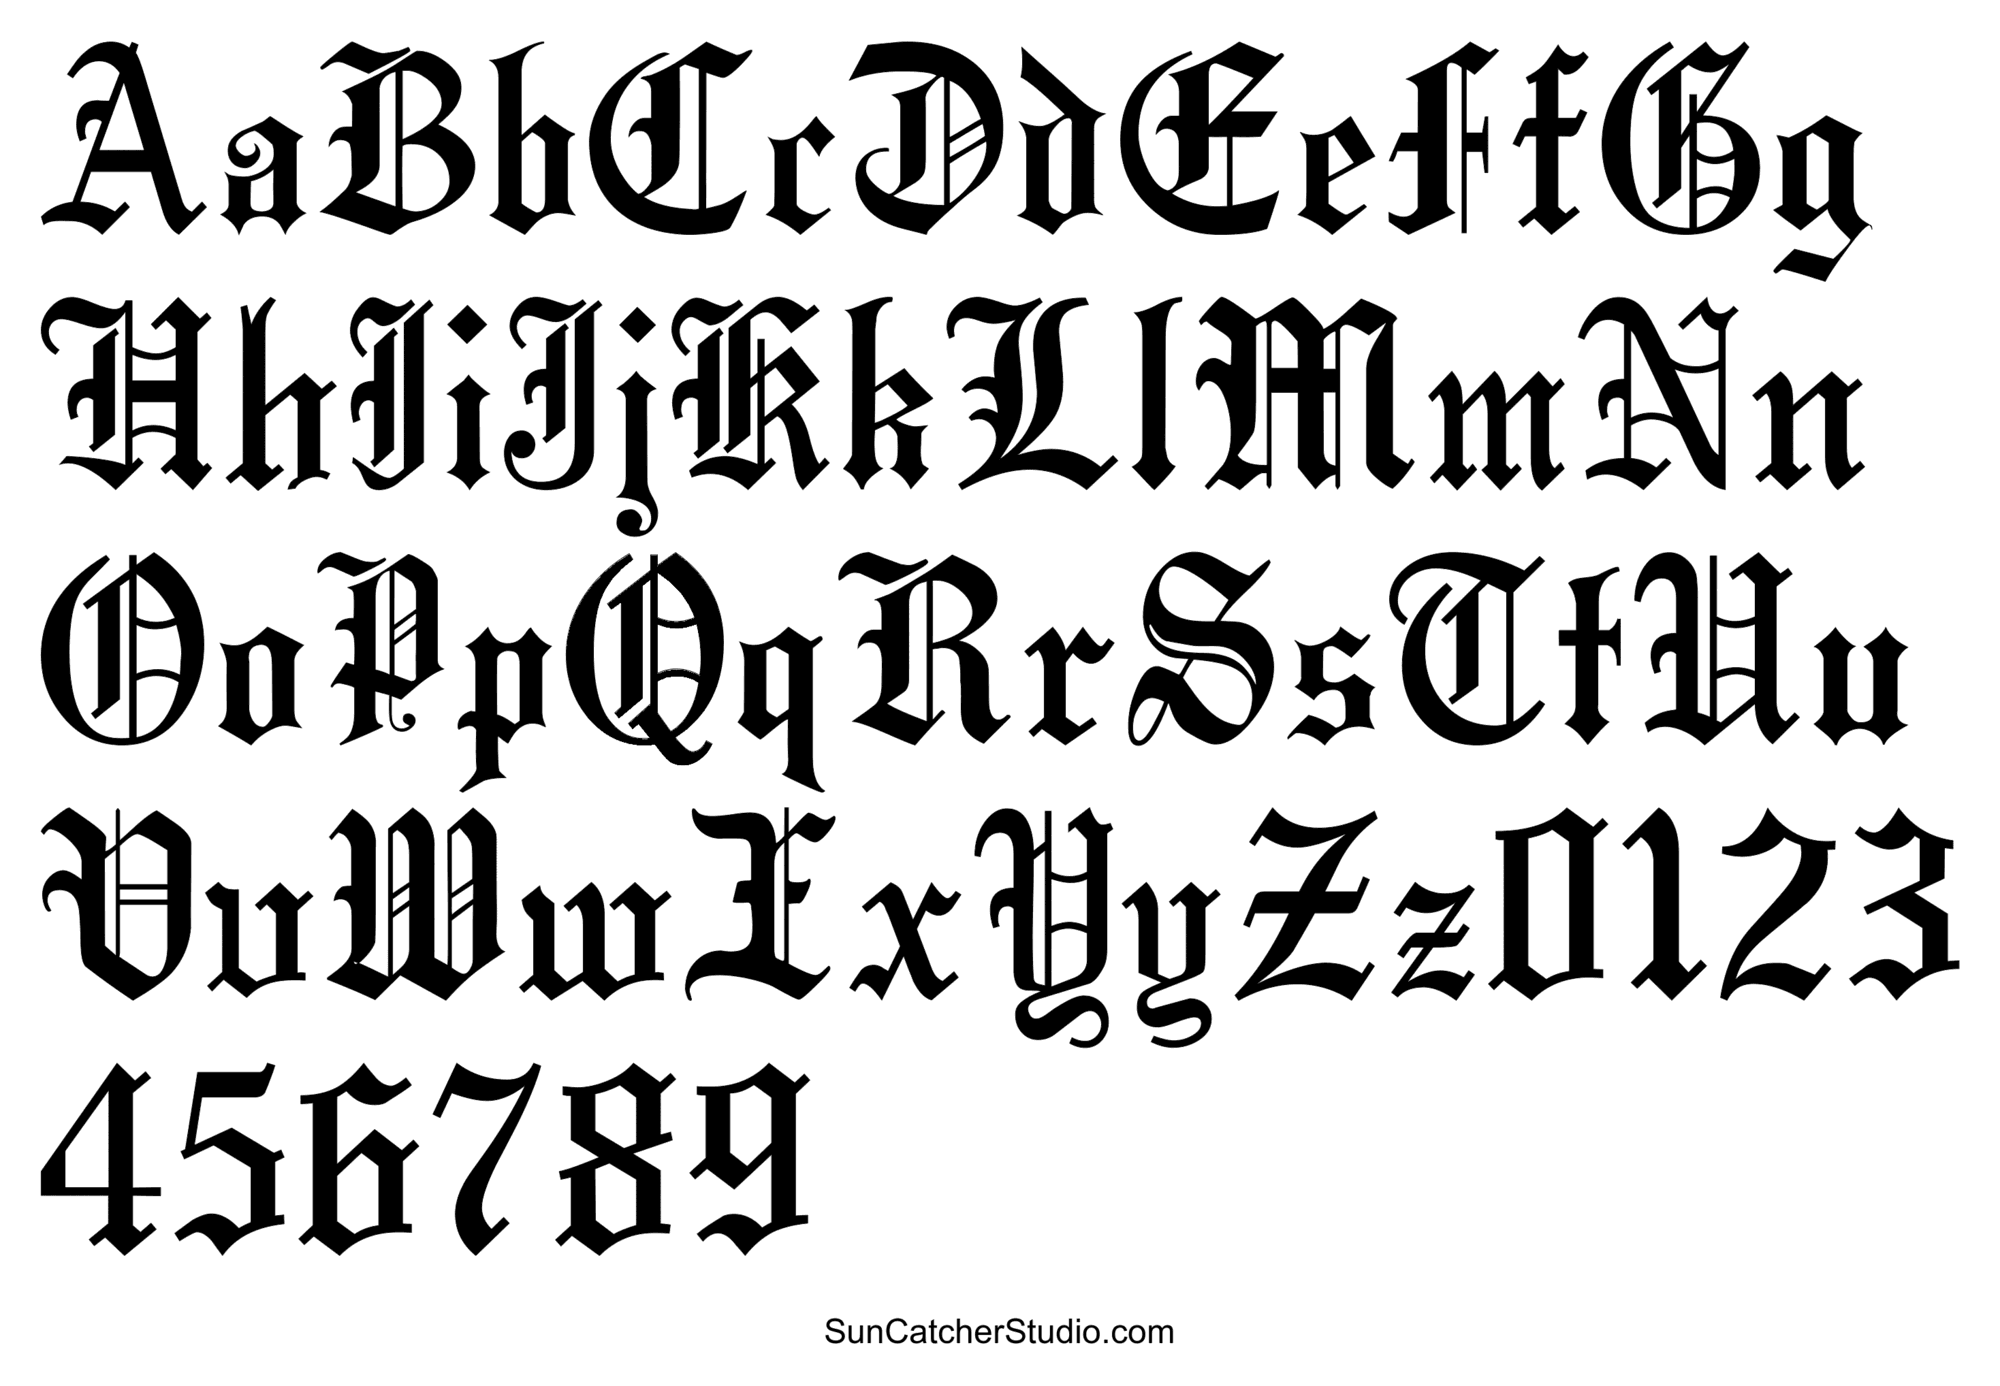 Old English Font (Gothic Font) Generator & Letters – DIY Projects,  Patterns, Monograms, Designs, Templates